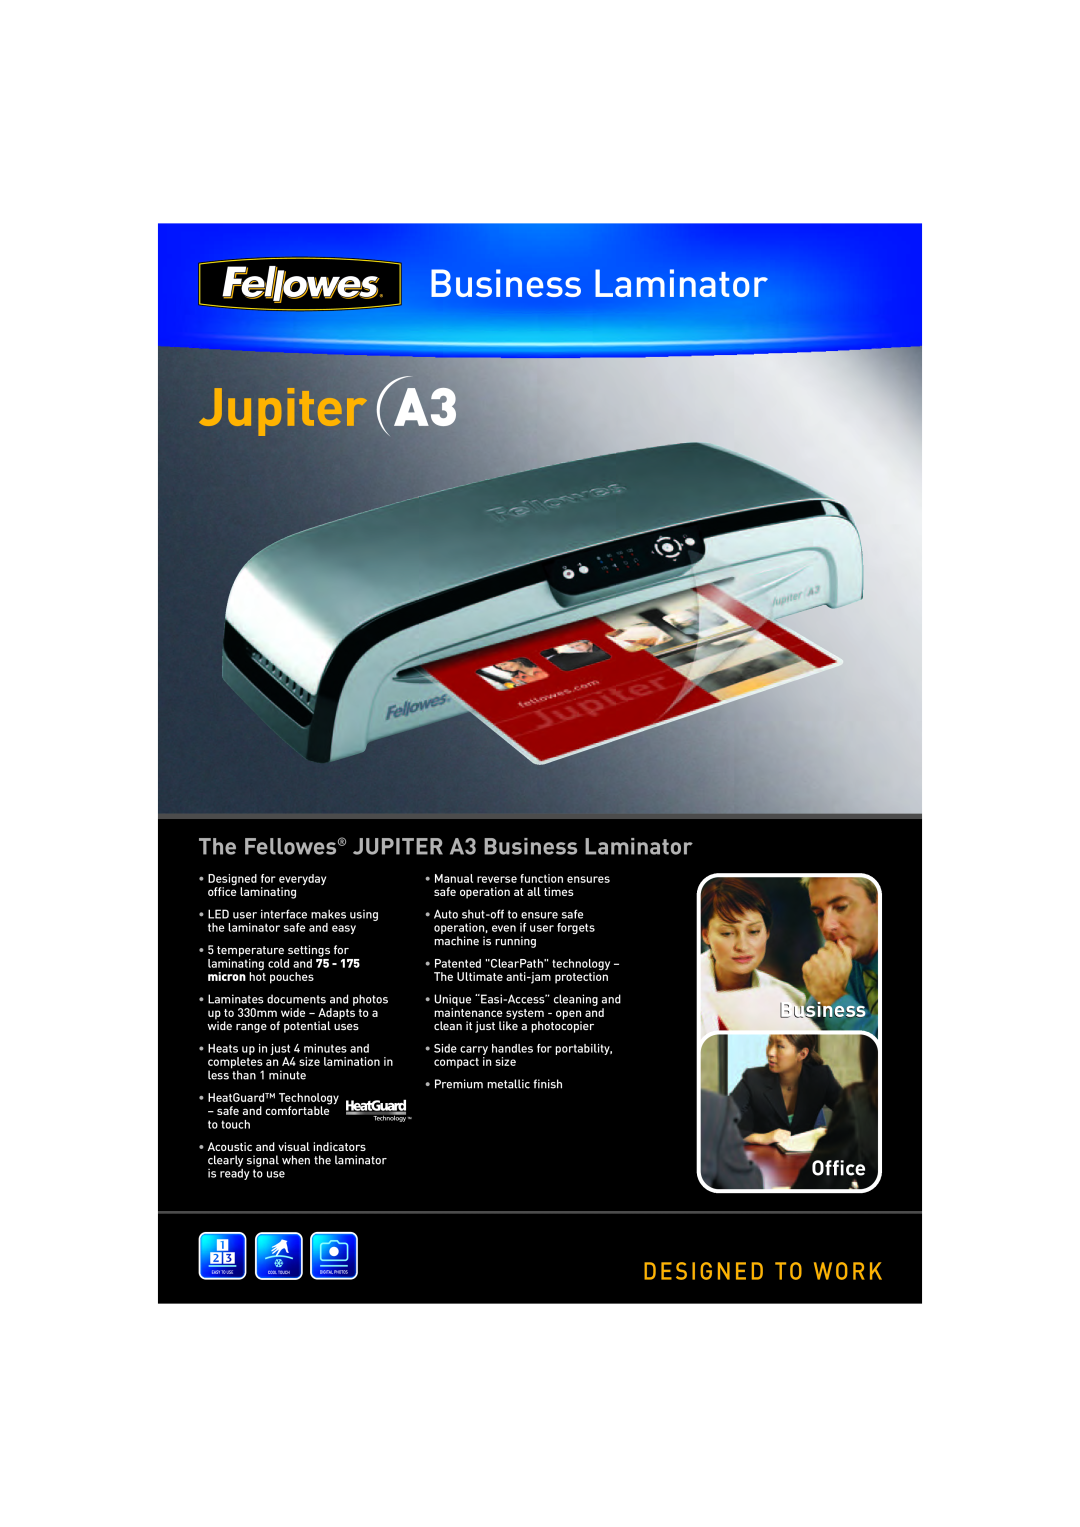 Fellowes a3 manual Designed To Work, The Fellowes JUPITER A3 Business Laminator, Office 